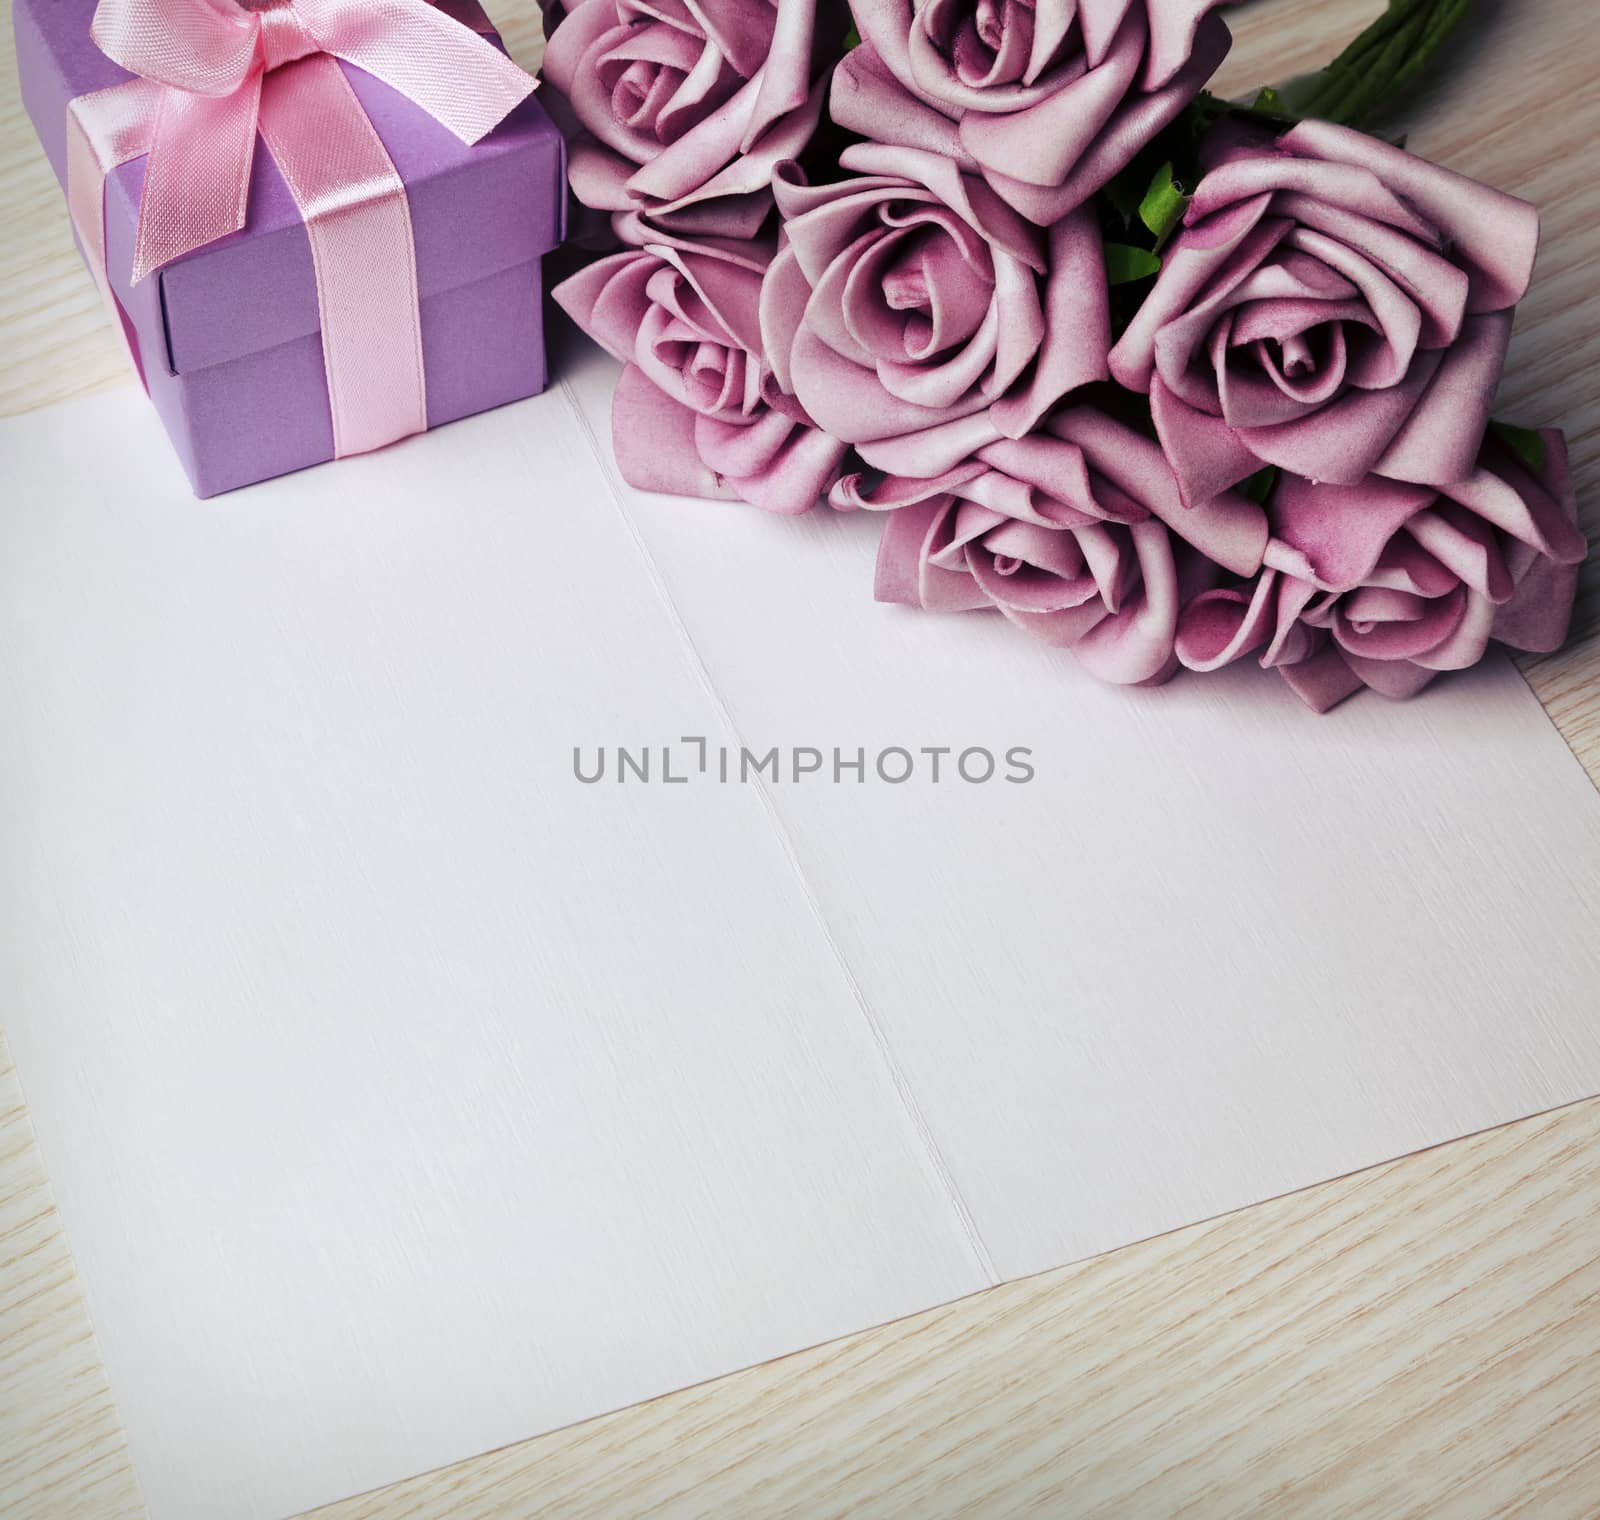 blank card with a pen, purple roses and purple gift box